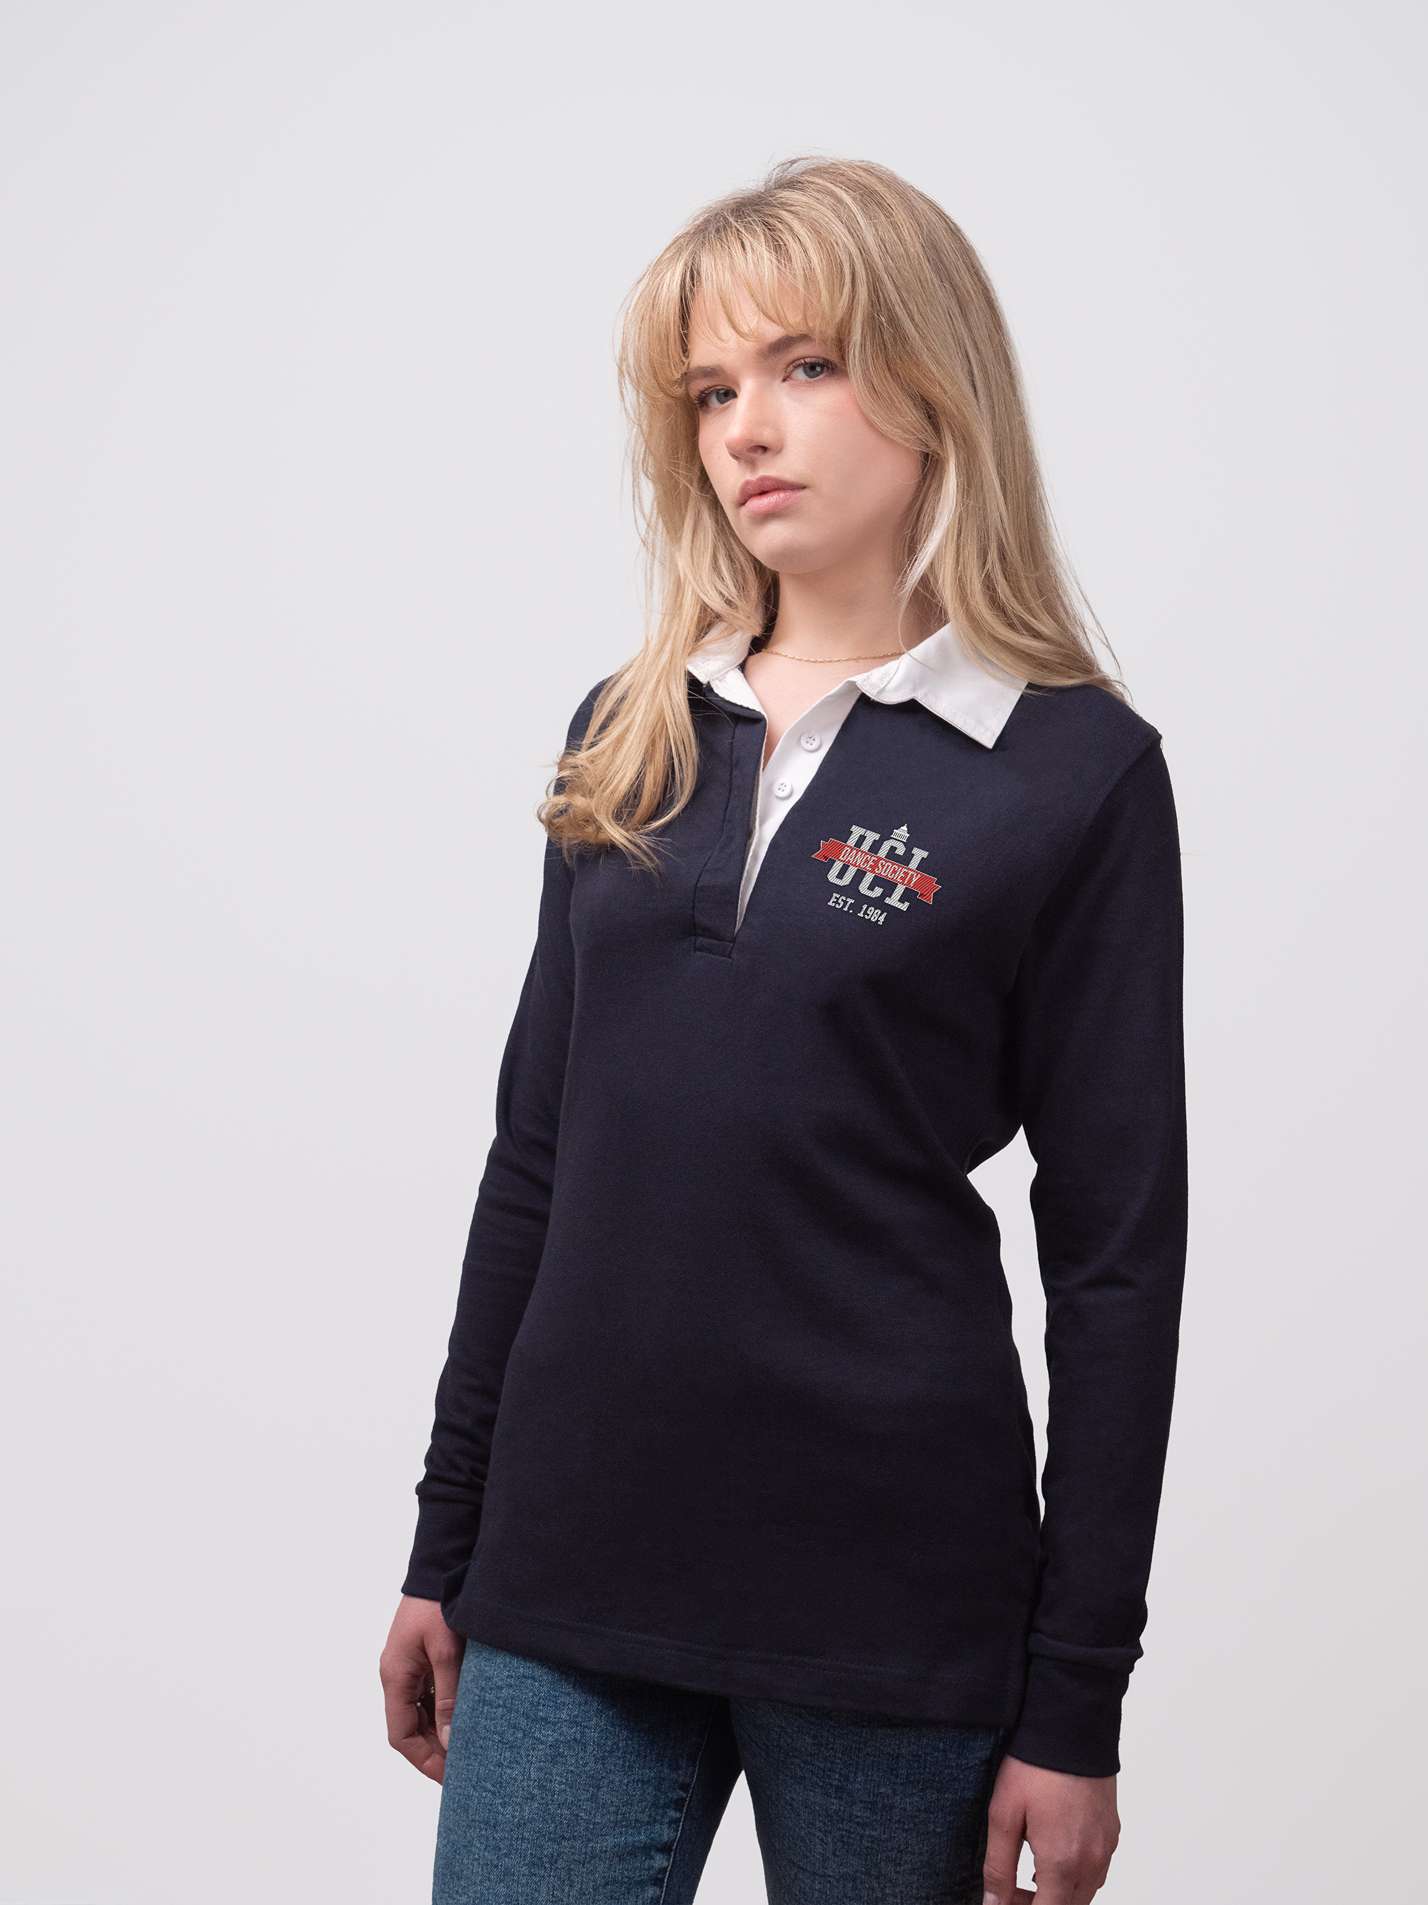 UCL Dance Society Competition Team Classic Ladies Rugby Shirt